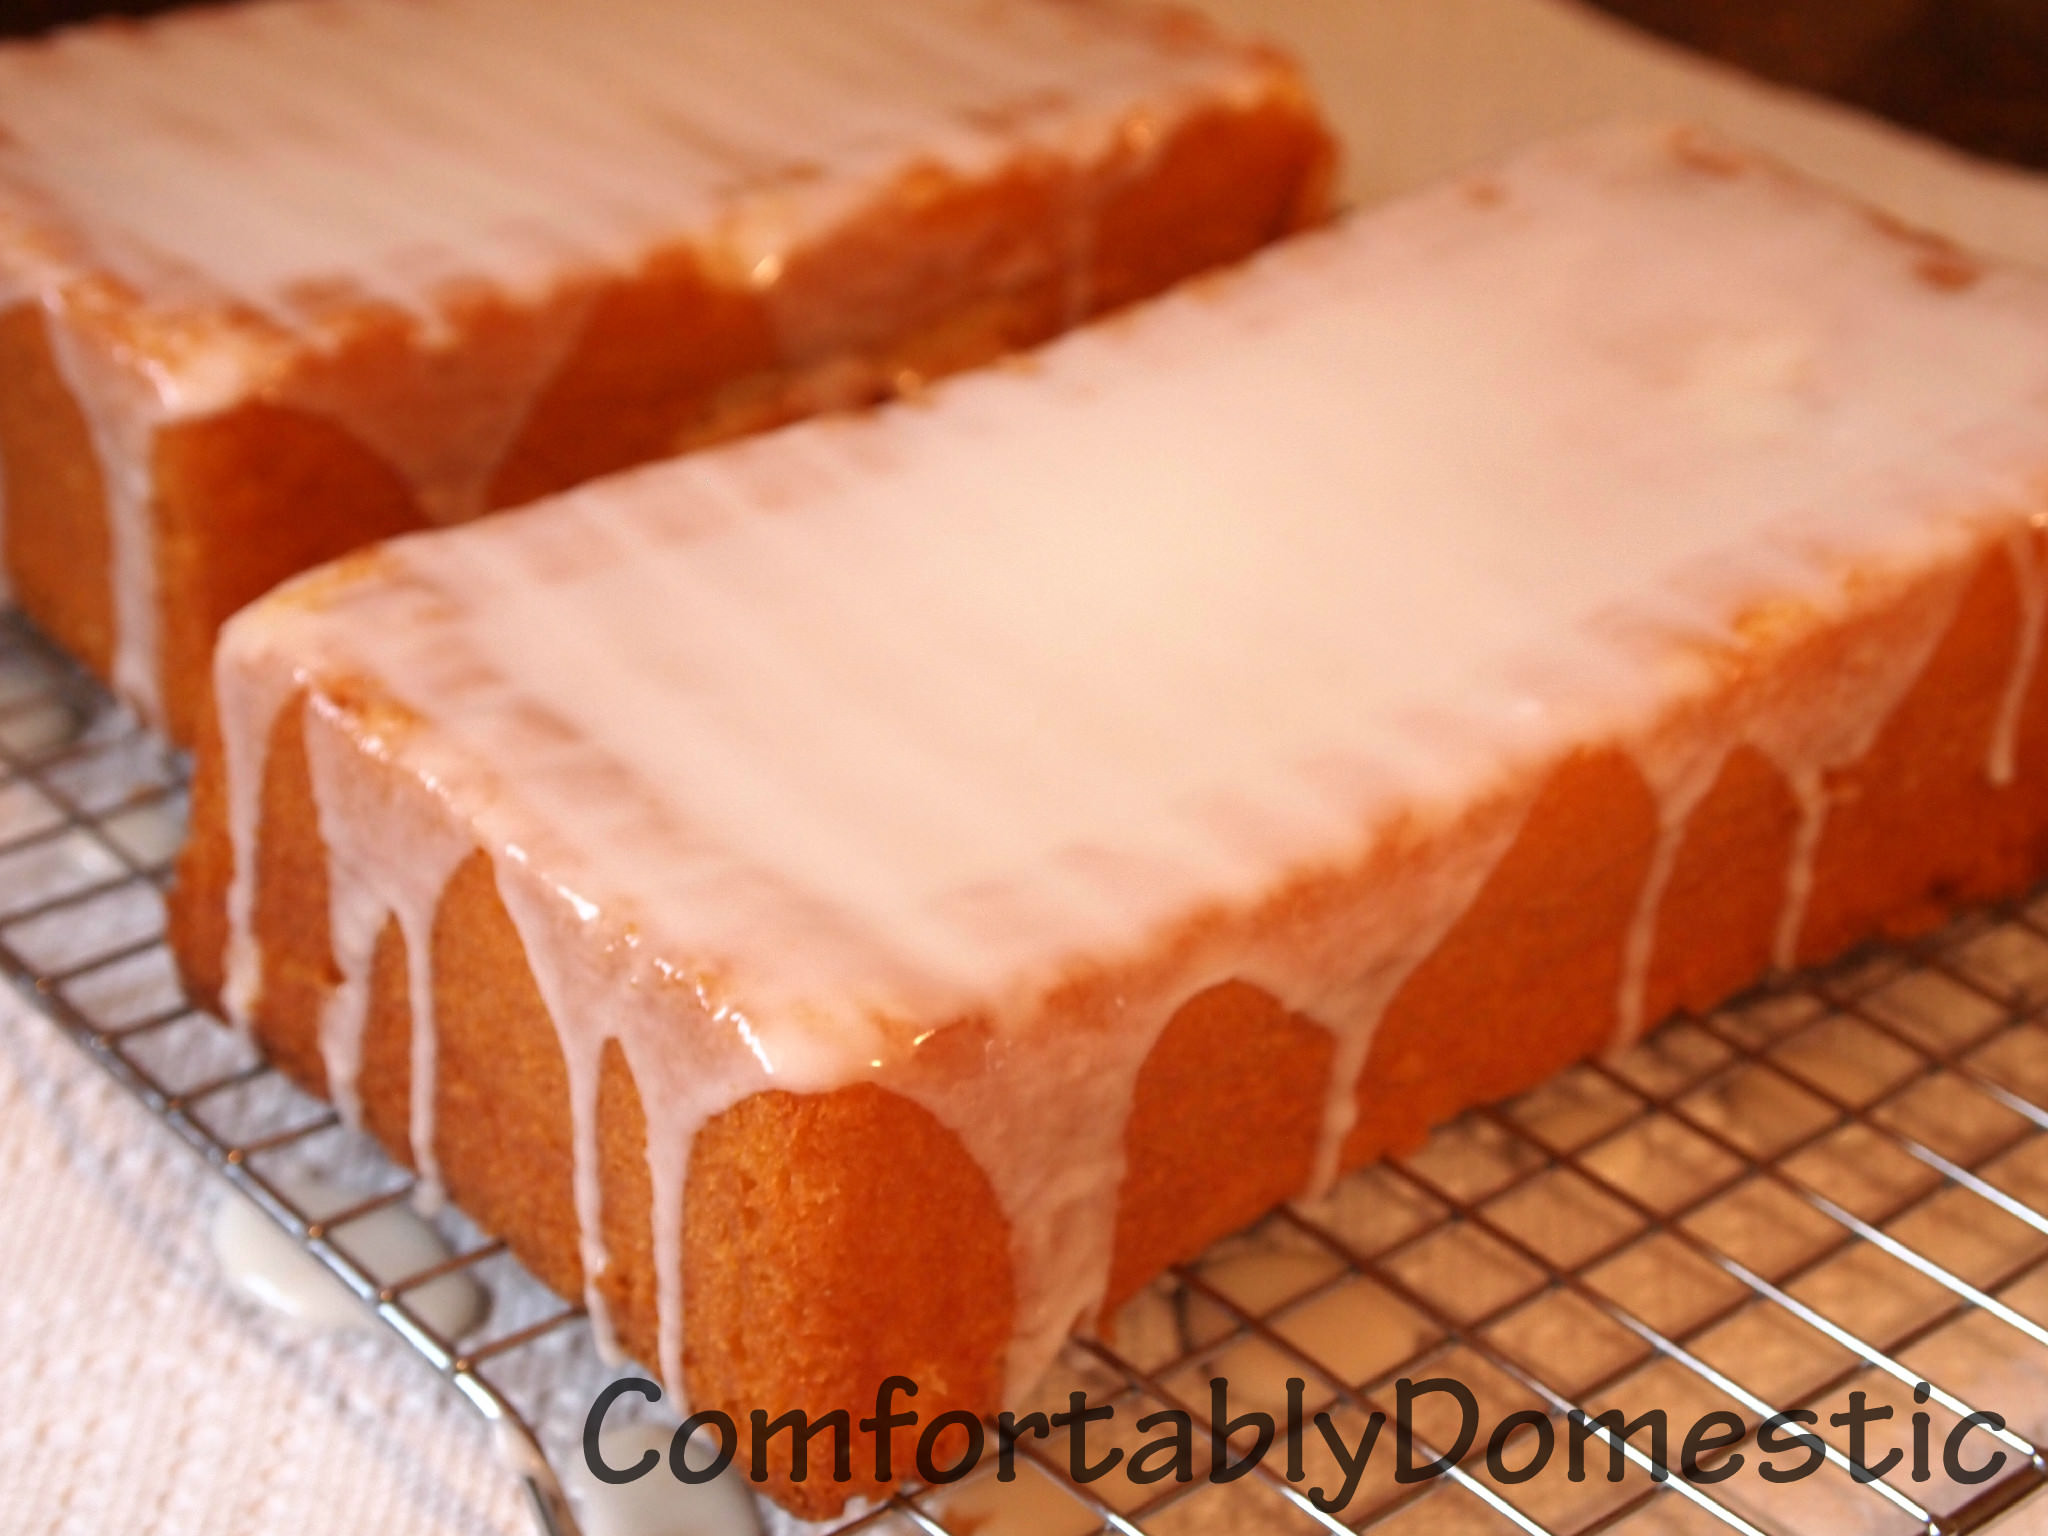 Iced lemon loaf is the perfect treat with a cup of coffee. Now there's no need to get it at the local coffee shop, because you can make it at home for a fraction of the cost!